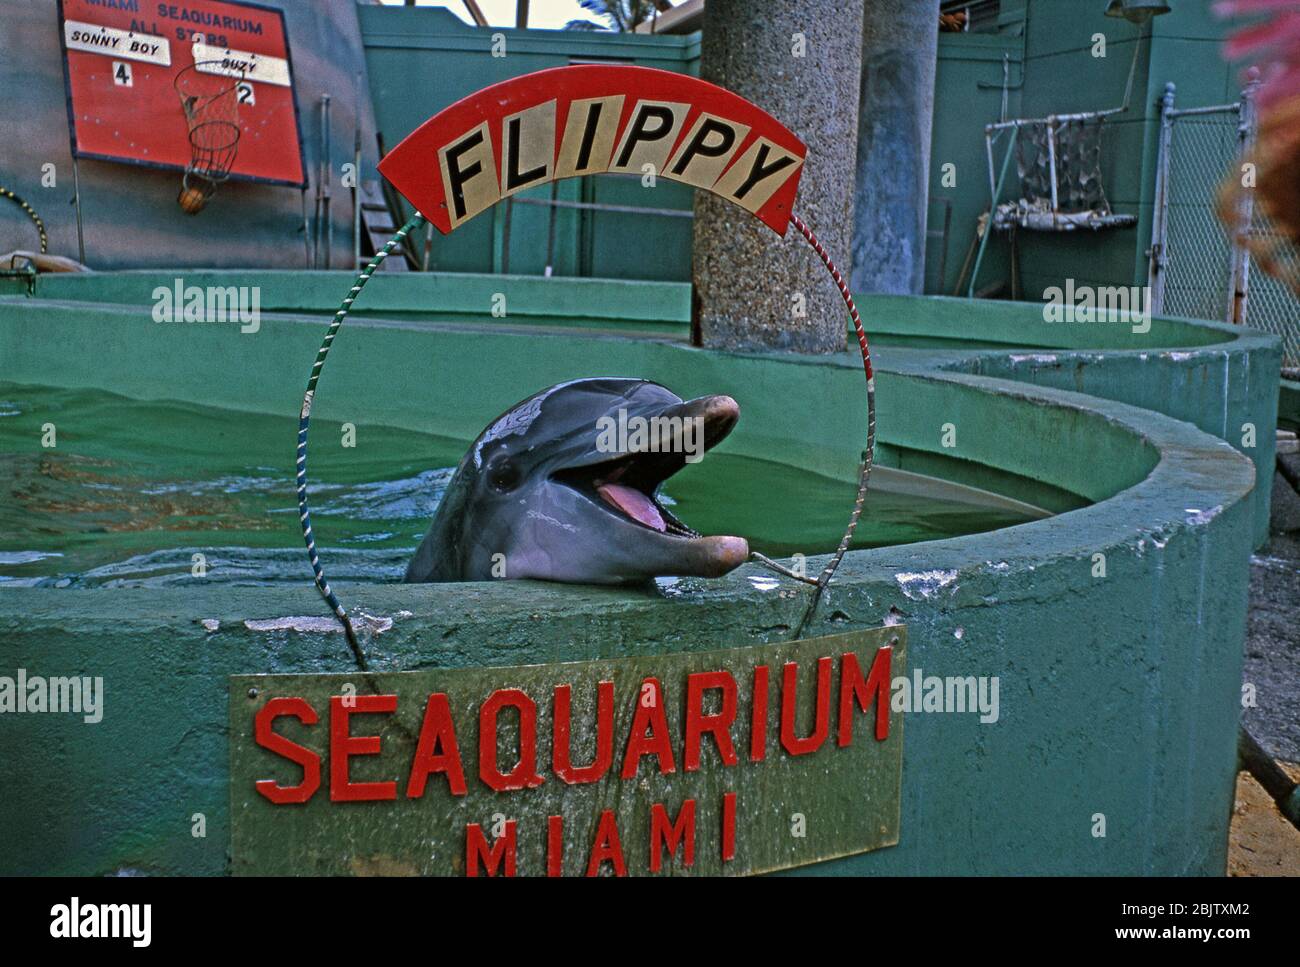 Bottlenose dolphin 'Flippy' in its holding tank at the Miami Seaquarium, Florida, USA c. 1960. The Seaquarium is a large oceanarium, opened in 1955. Dolphins were given names that suited them, the most famous being Flipper. The first dolphin named Flippy lived at Florida's Marine Studios. In 1949 Flippy entertained the crowds – the act included Flippy towing a woman and a dog around the pool on a surfboard! Marine shows became big all over Florida. However, investigations over the years have shown that keeping and training captive sea mammals can involve animal cruelty and inhumane treatment. Stock Photo